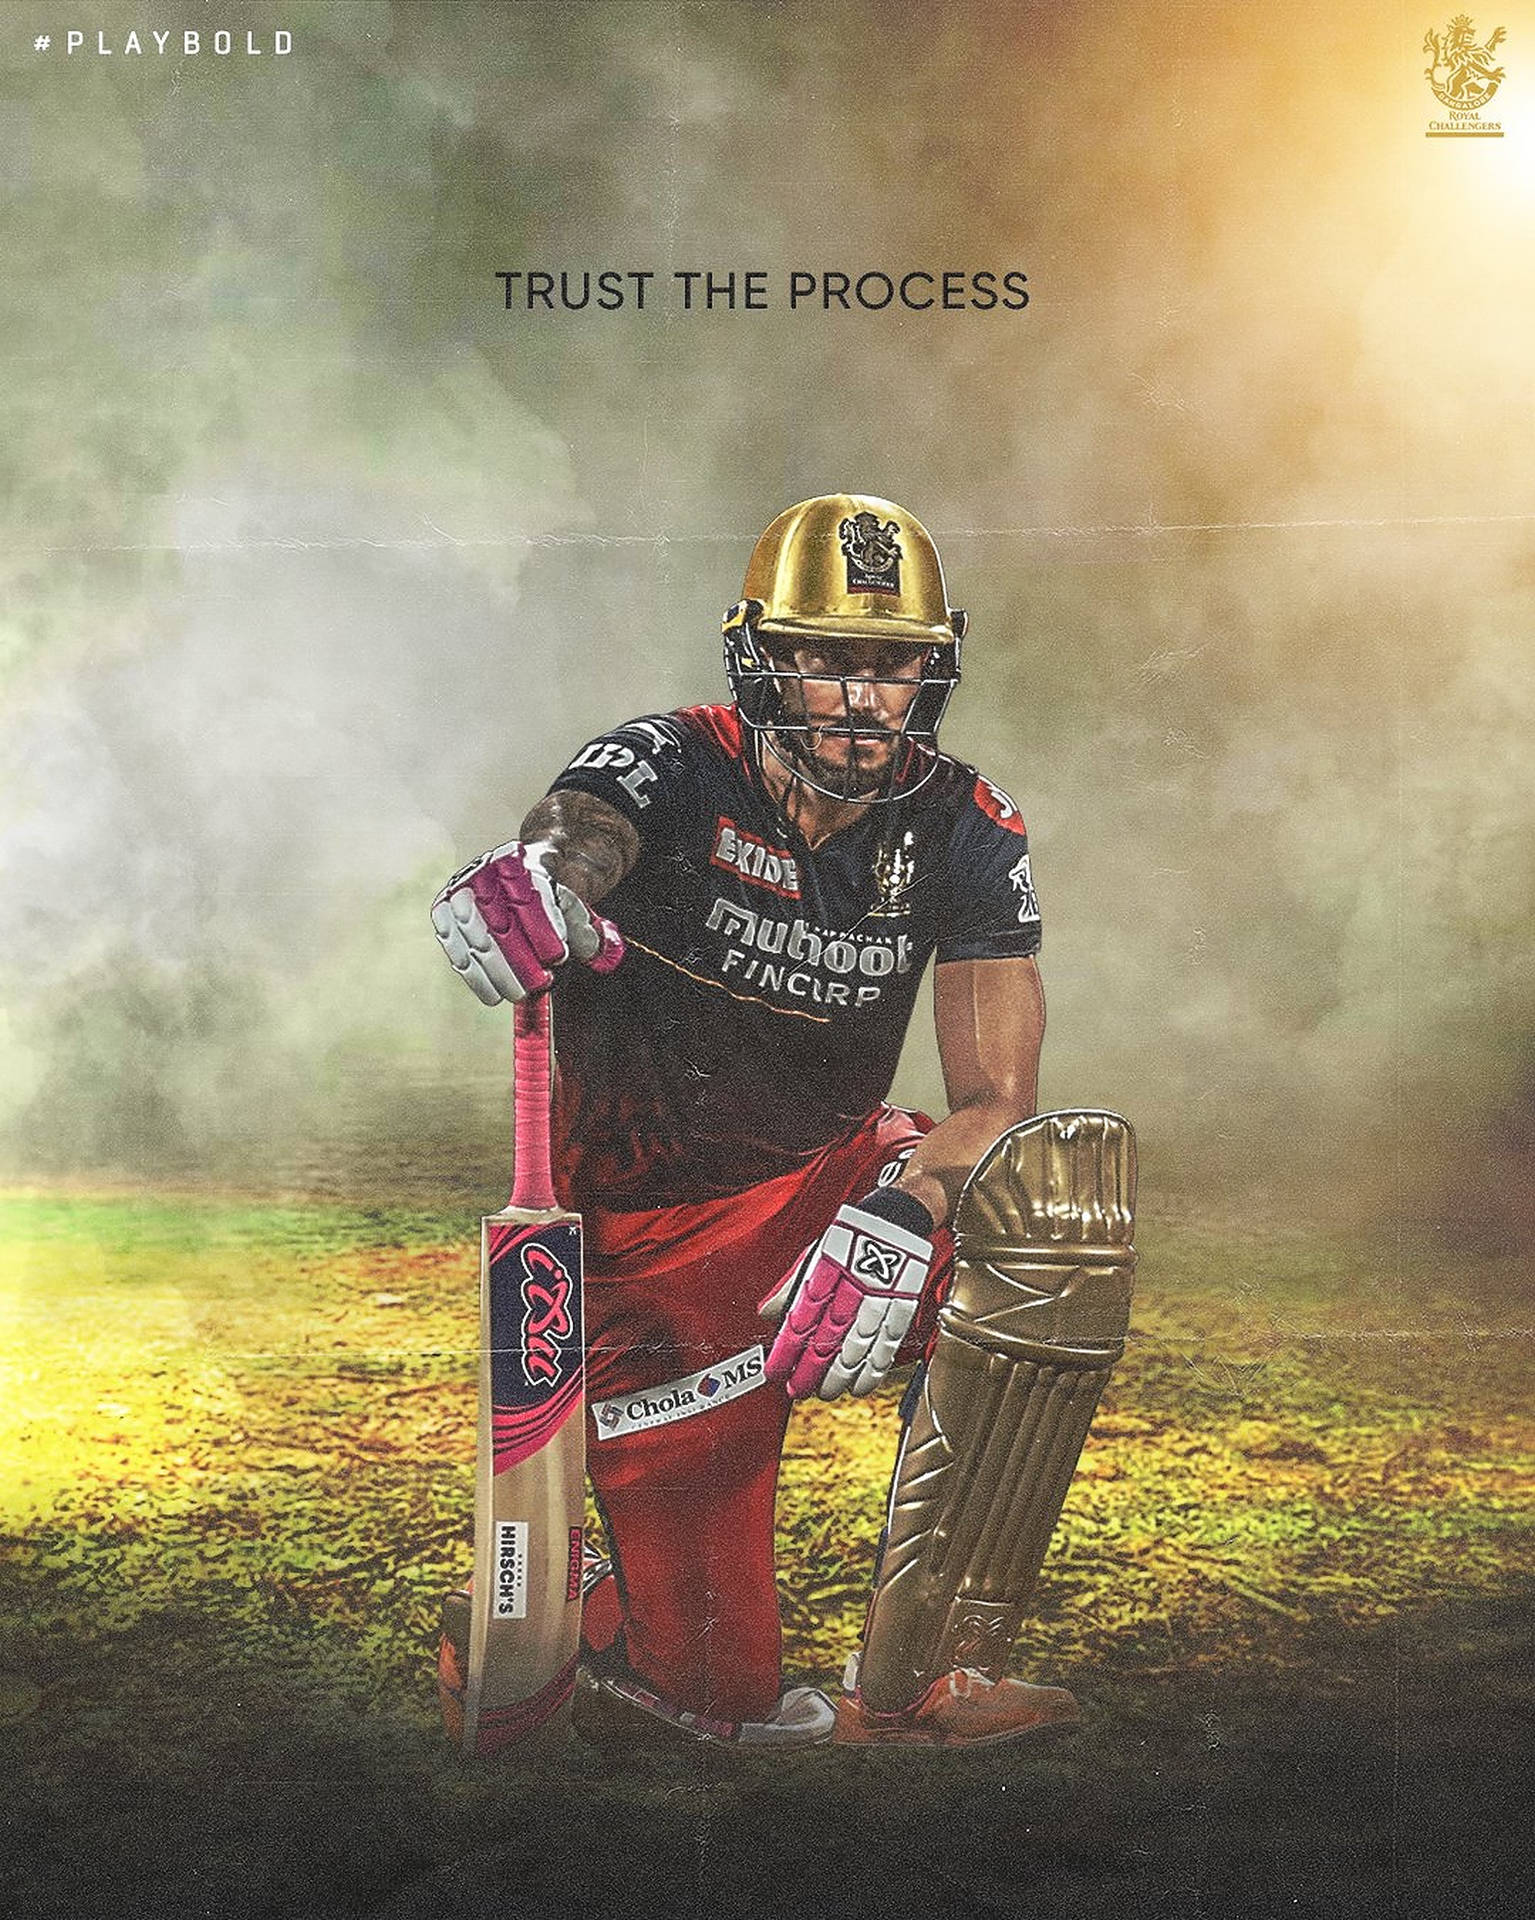 Royal Challengers Bangalore Trust The Process